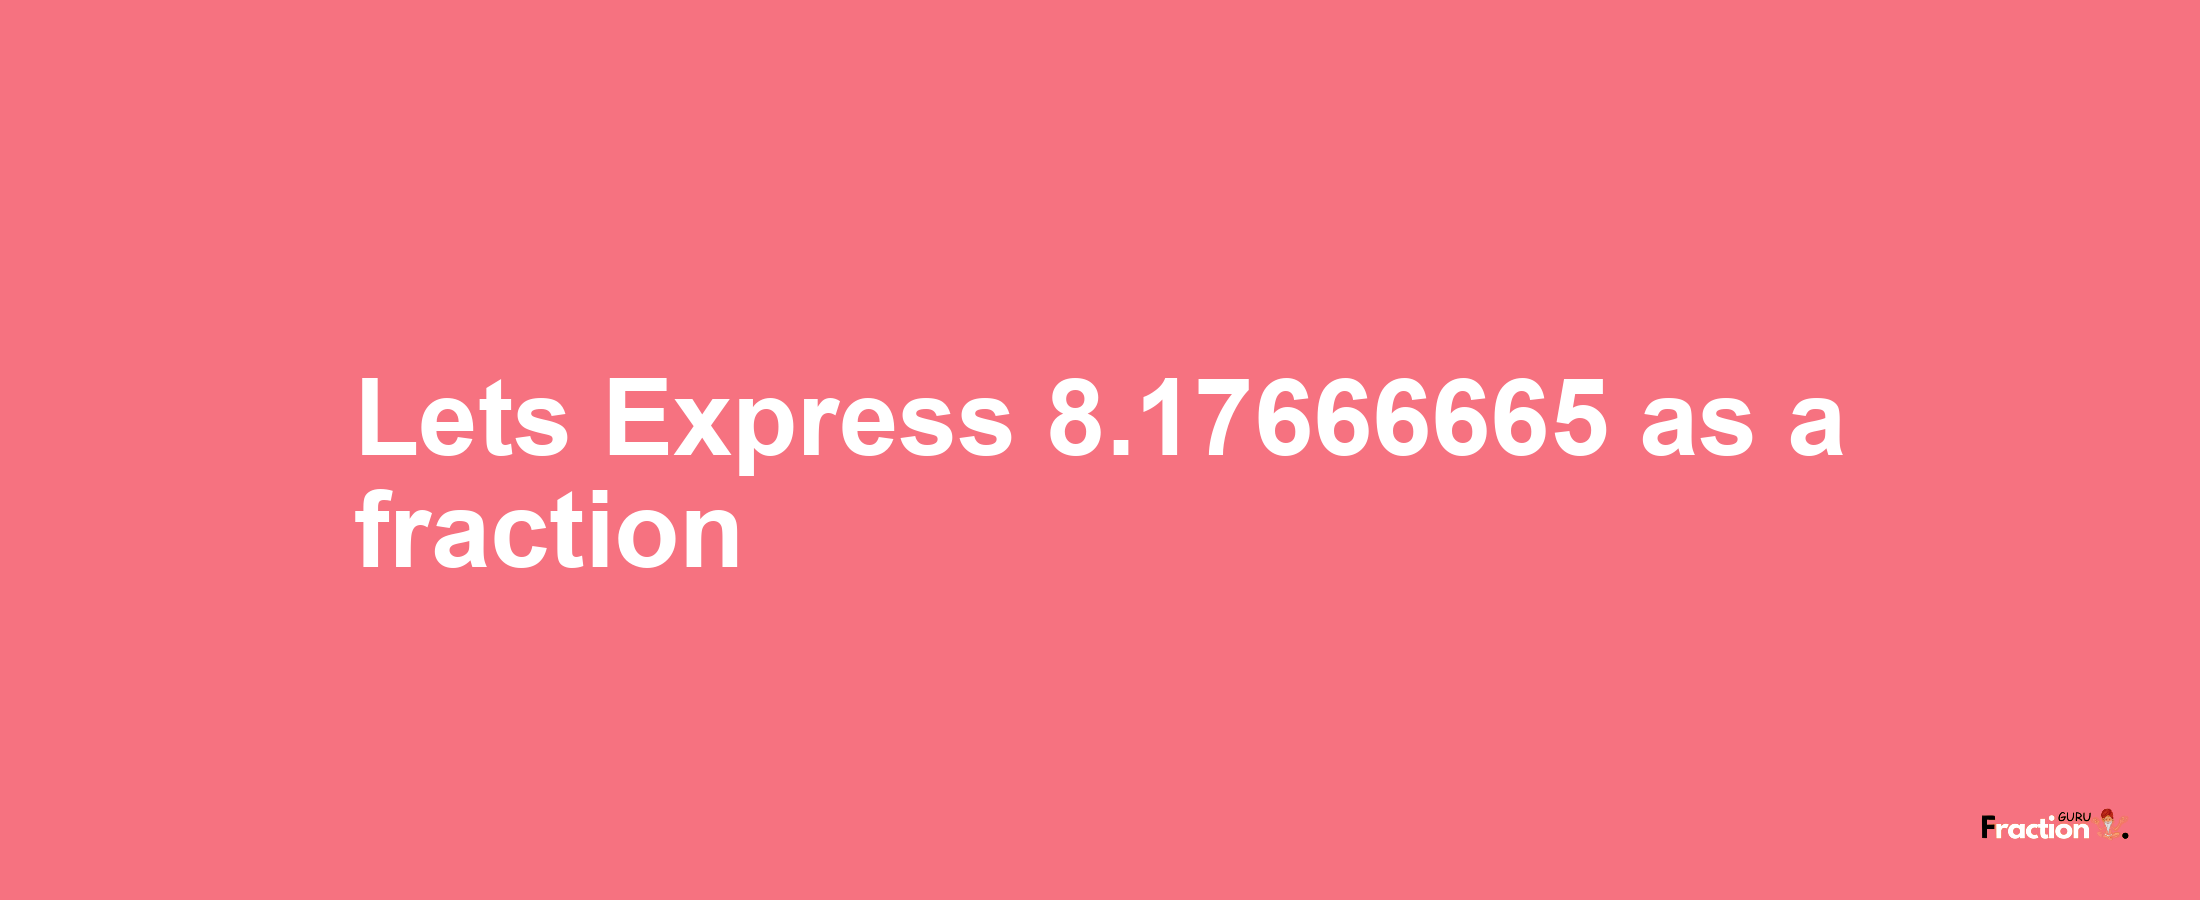 Lets Express 8.17666665 as afraction